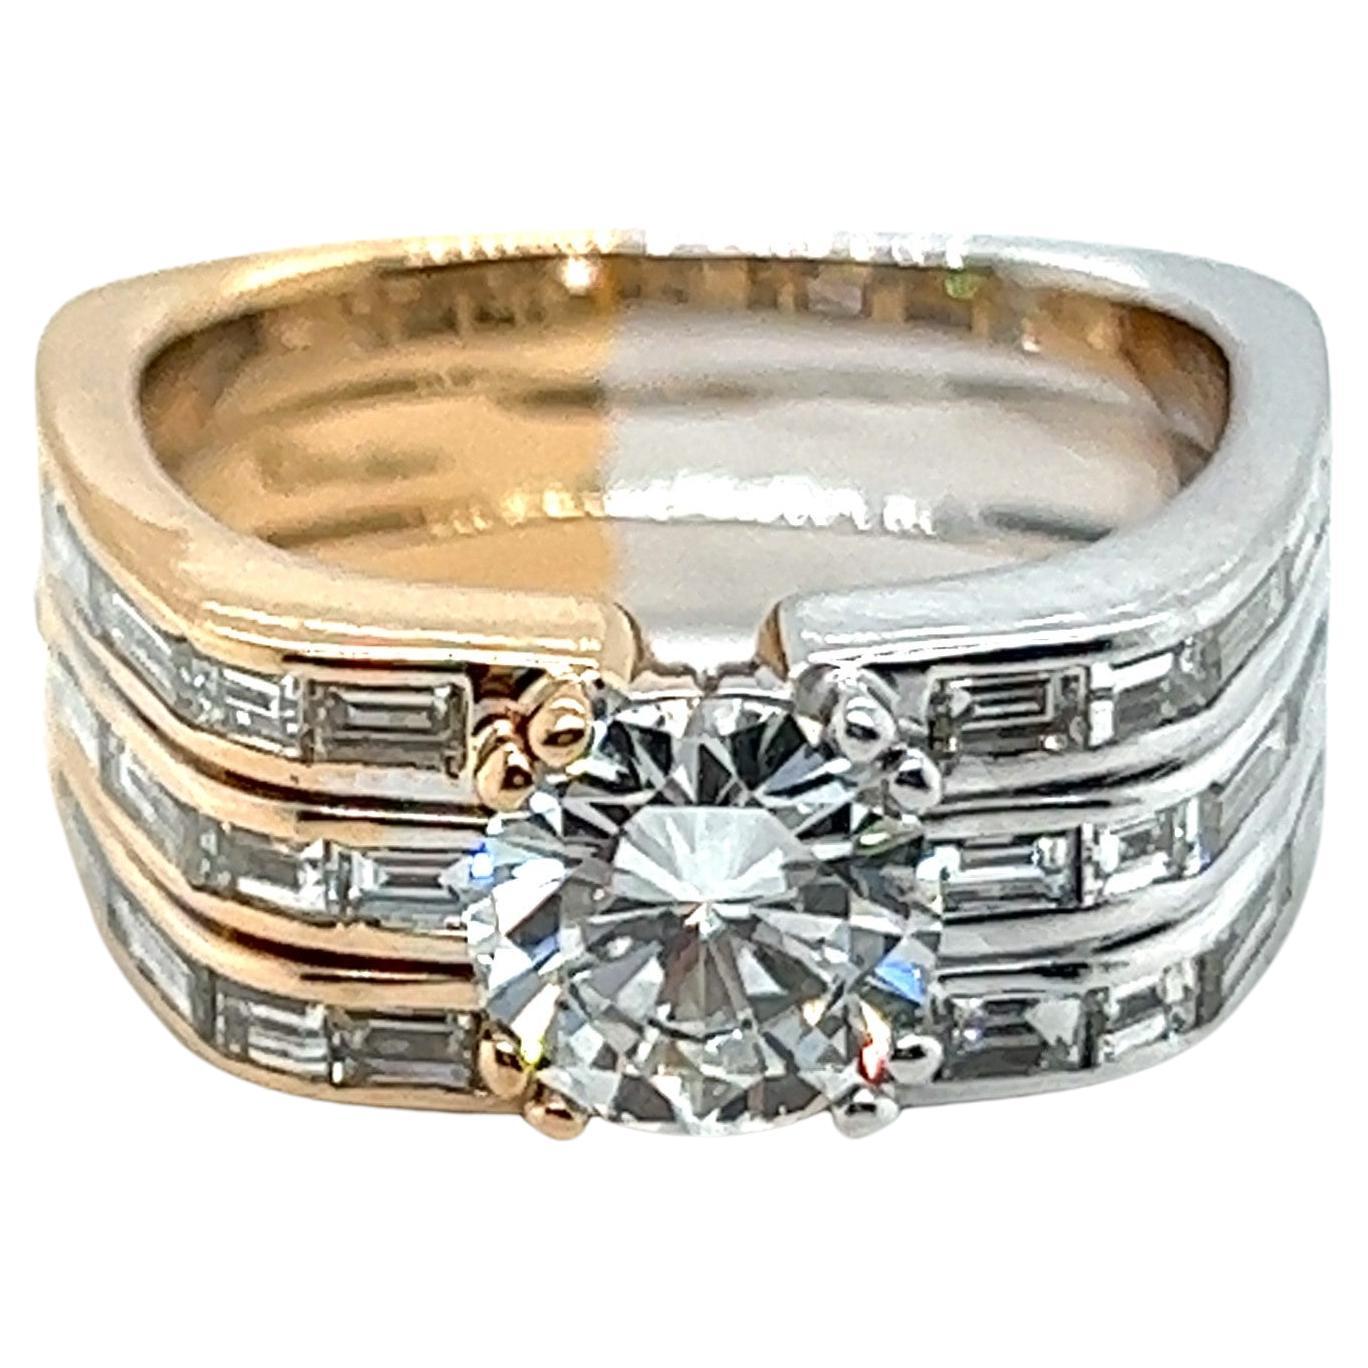 Graphic Diamond Ring in 18 Karat White and Red Gold by Binder